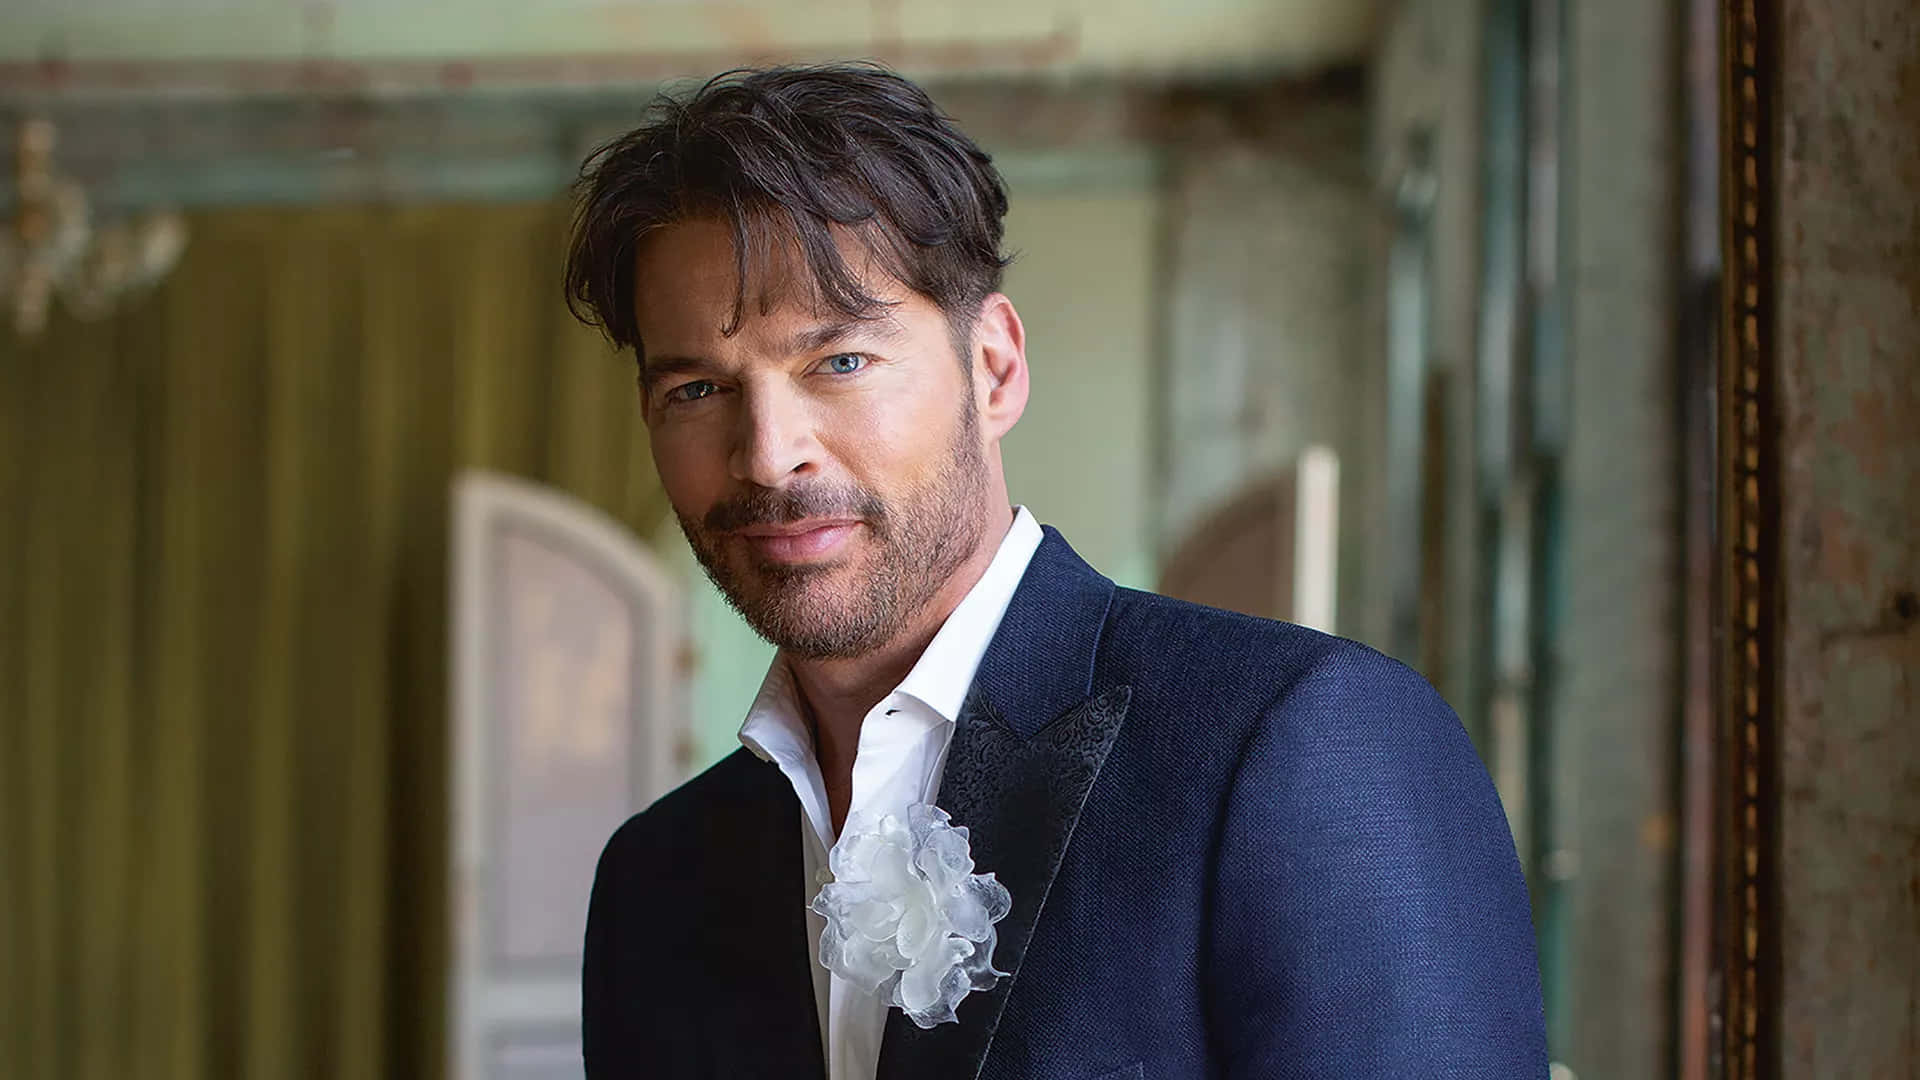 Harry Connick Jr. striking a pose on stage Wallpaper